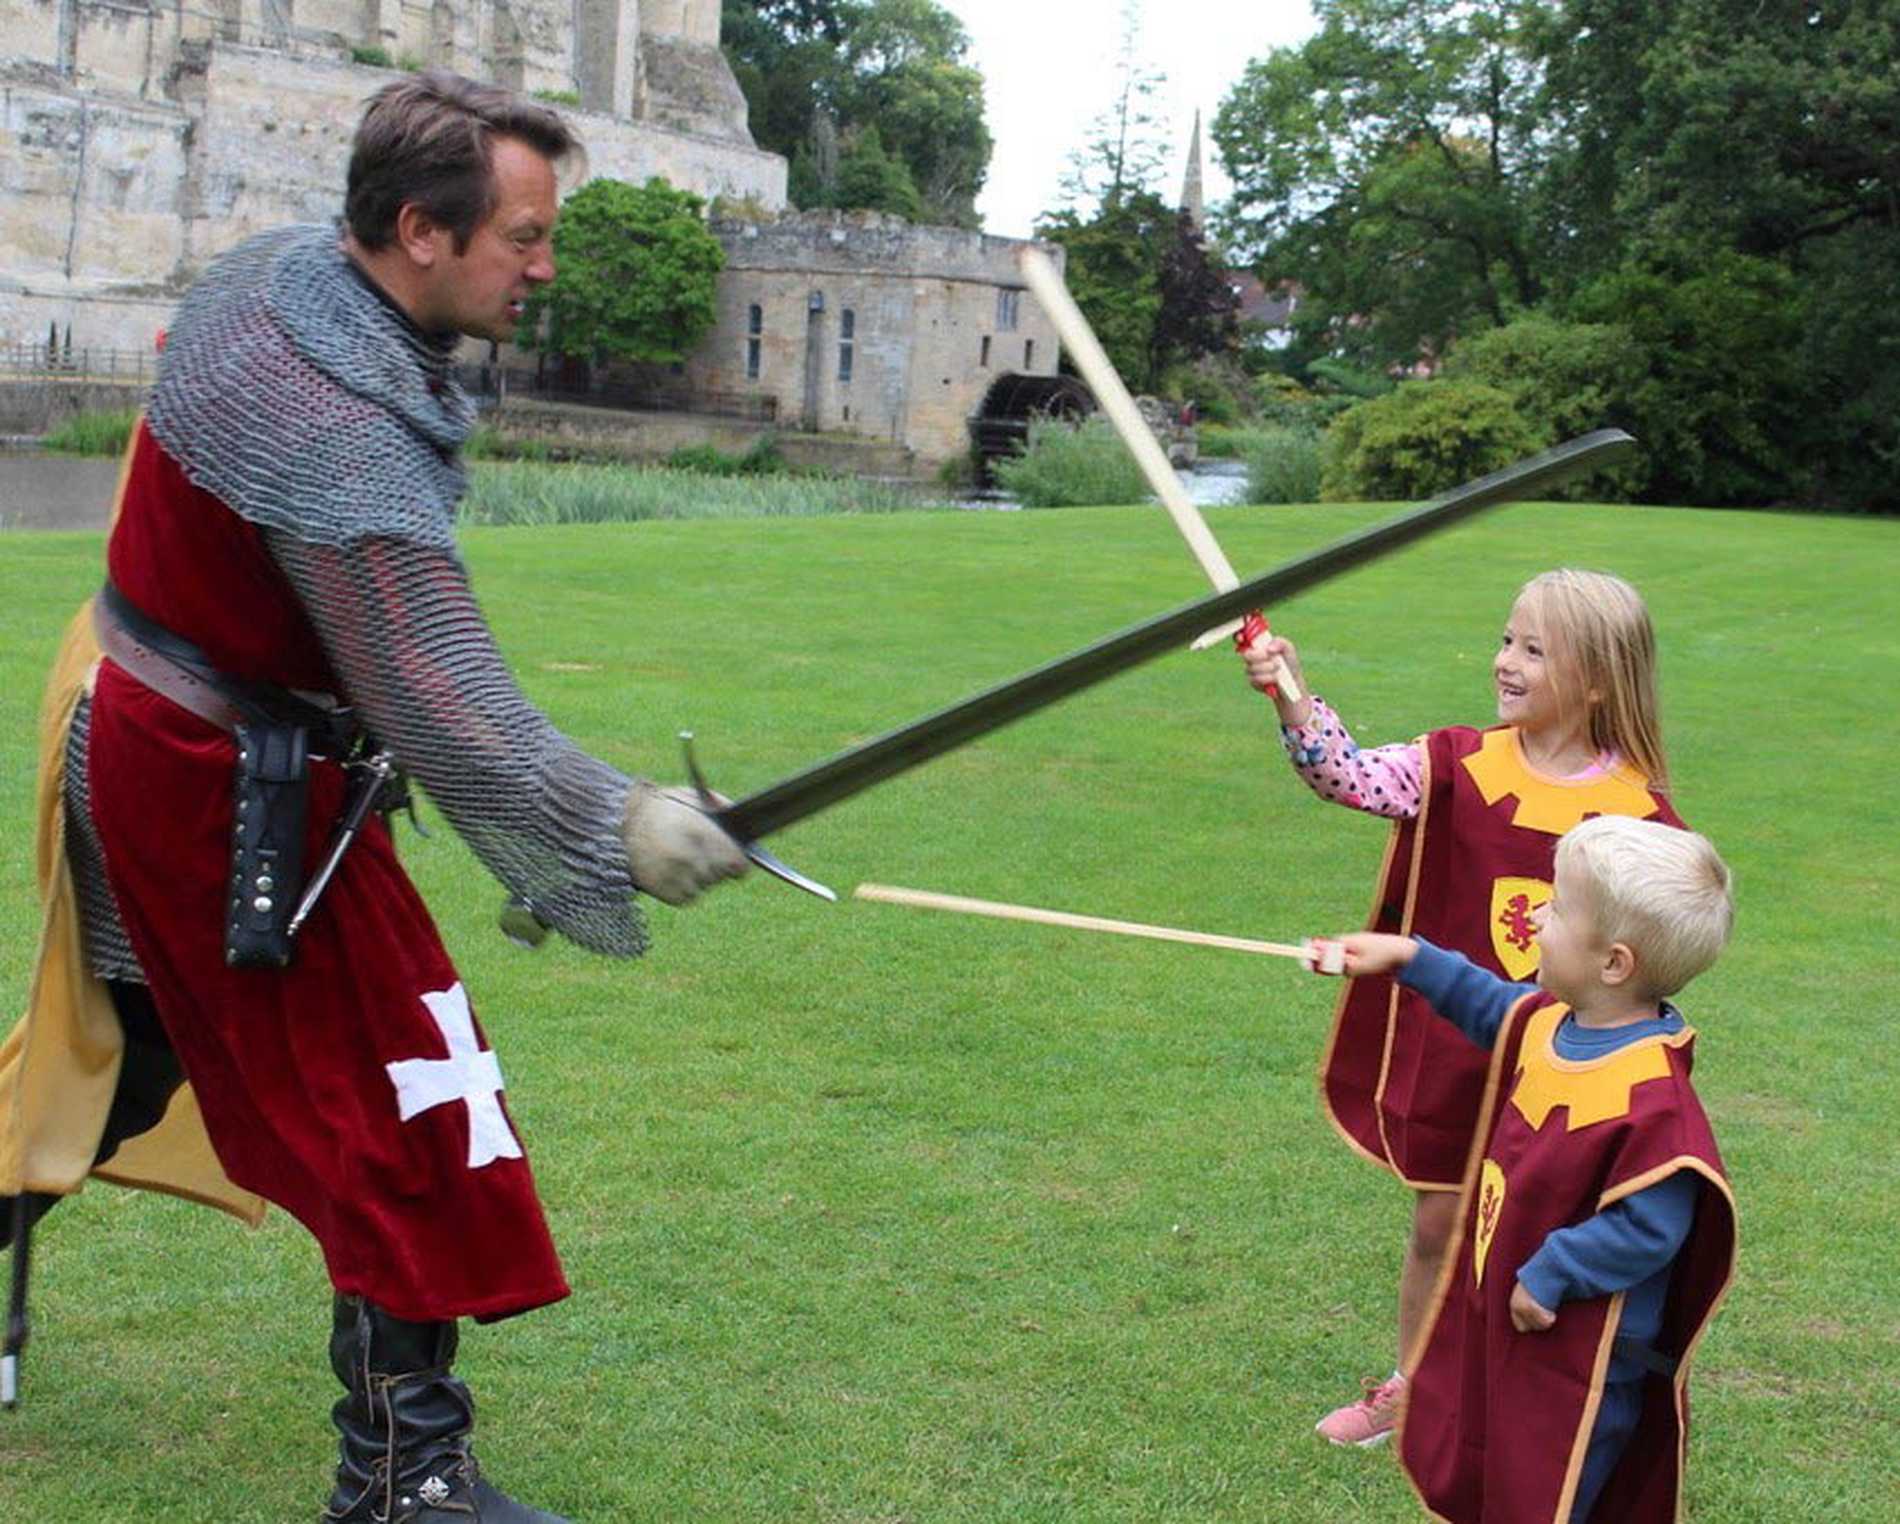 Hunor and his sister, Dorka having a sword fight against a knight in armour.